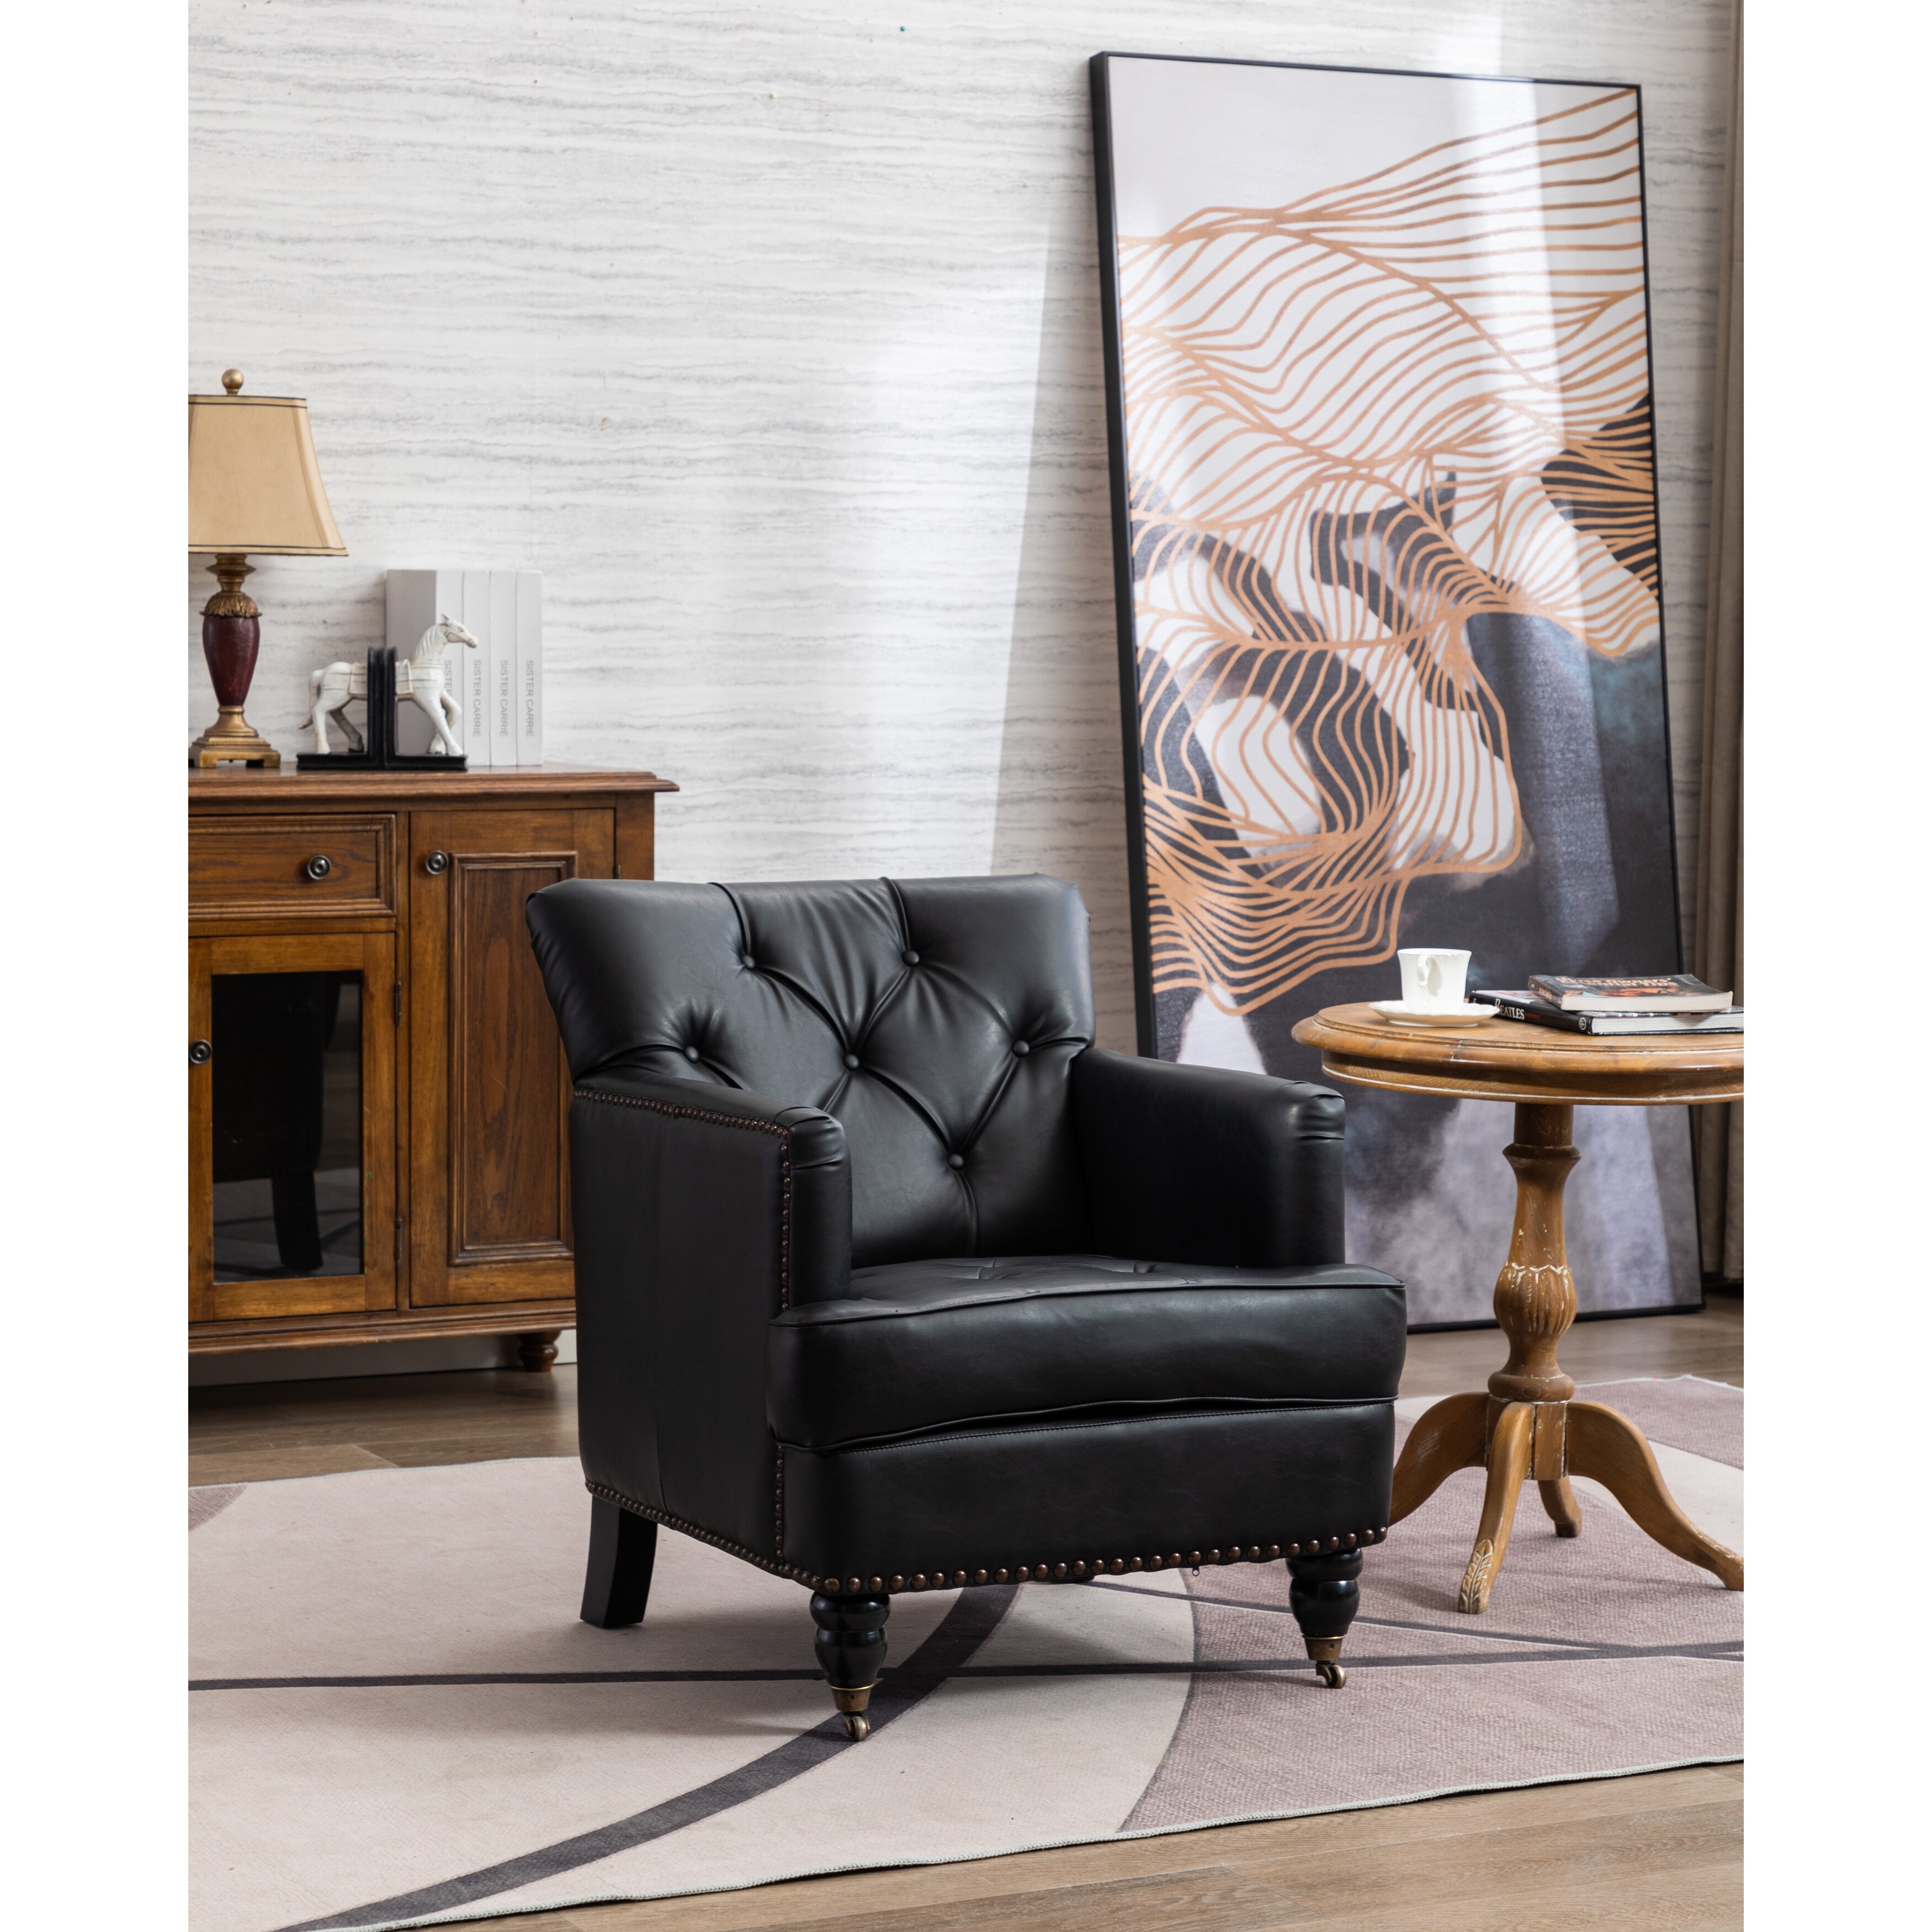 Modern Style Accent Chair For Living Room pu Leather Club Chair  black